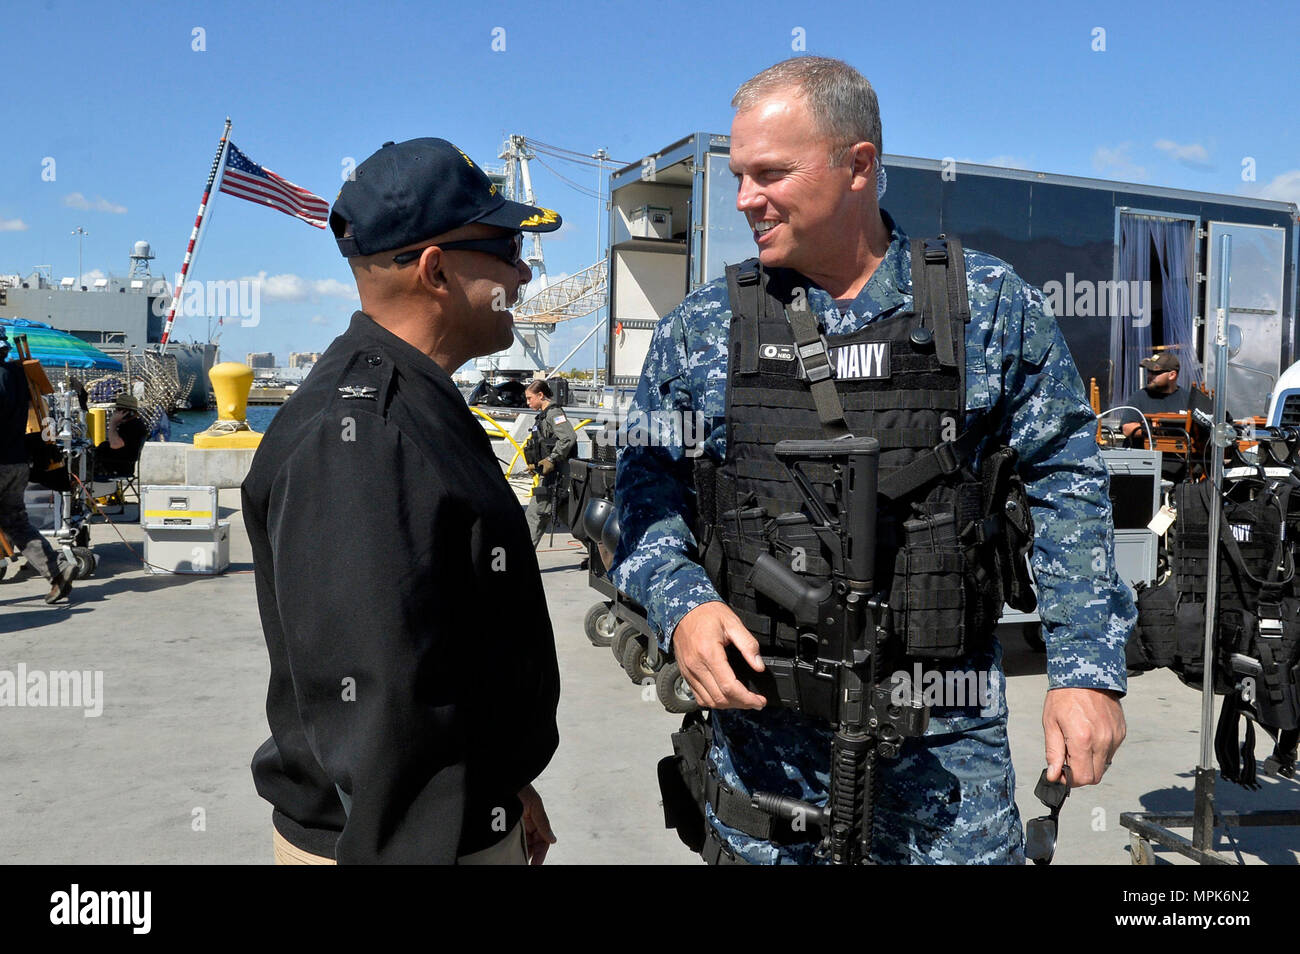 170323-N-IE405-021 SAN DIEGO (March 23, 2017) Naval Base San Diego Commanding Officer Capt. Roy Love greets actor Adam Baldwin prior to the filming of the television show 'The Last Ship' on board the guided (U.S. Navy photo by Mass Communication Specialist 2nd Class Indra Bosko/Released) Stock Photo